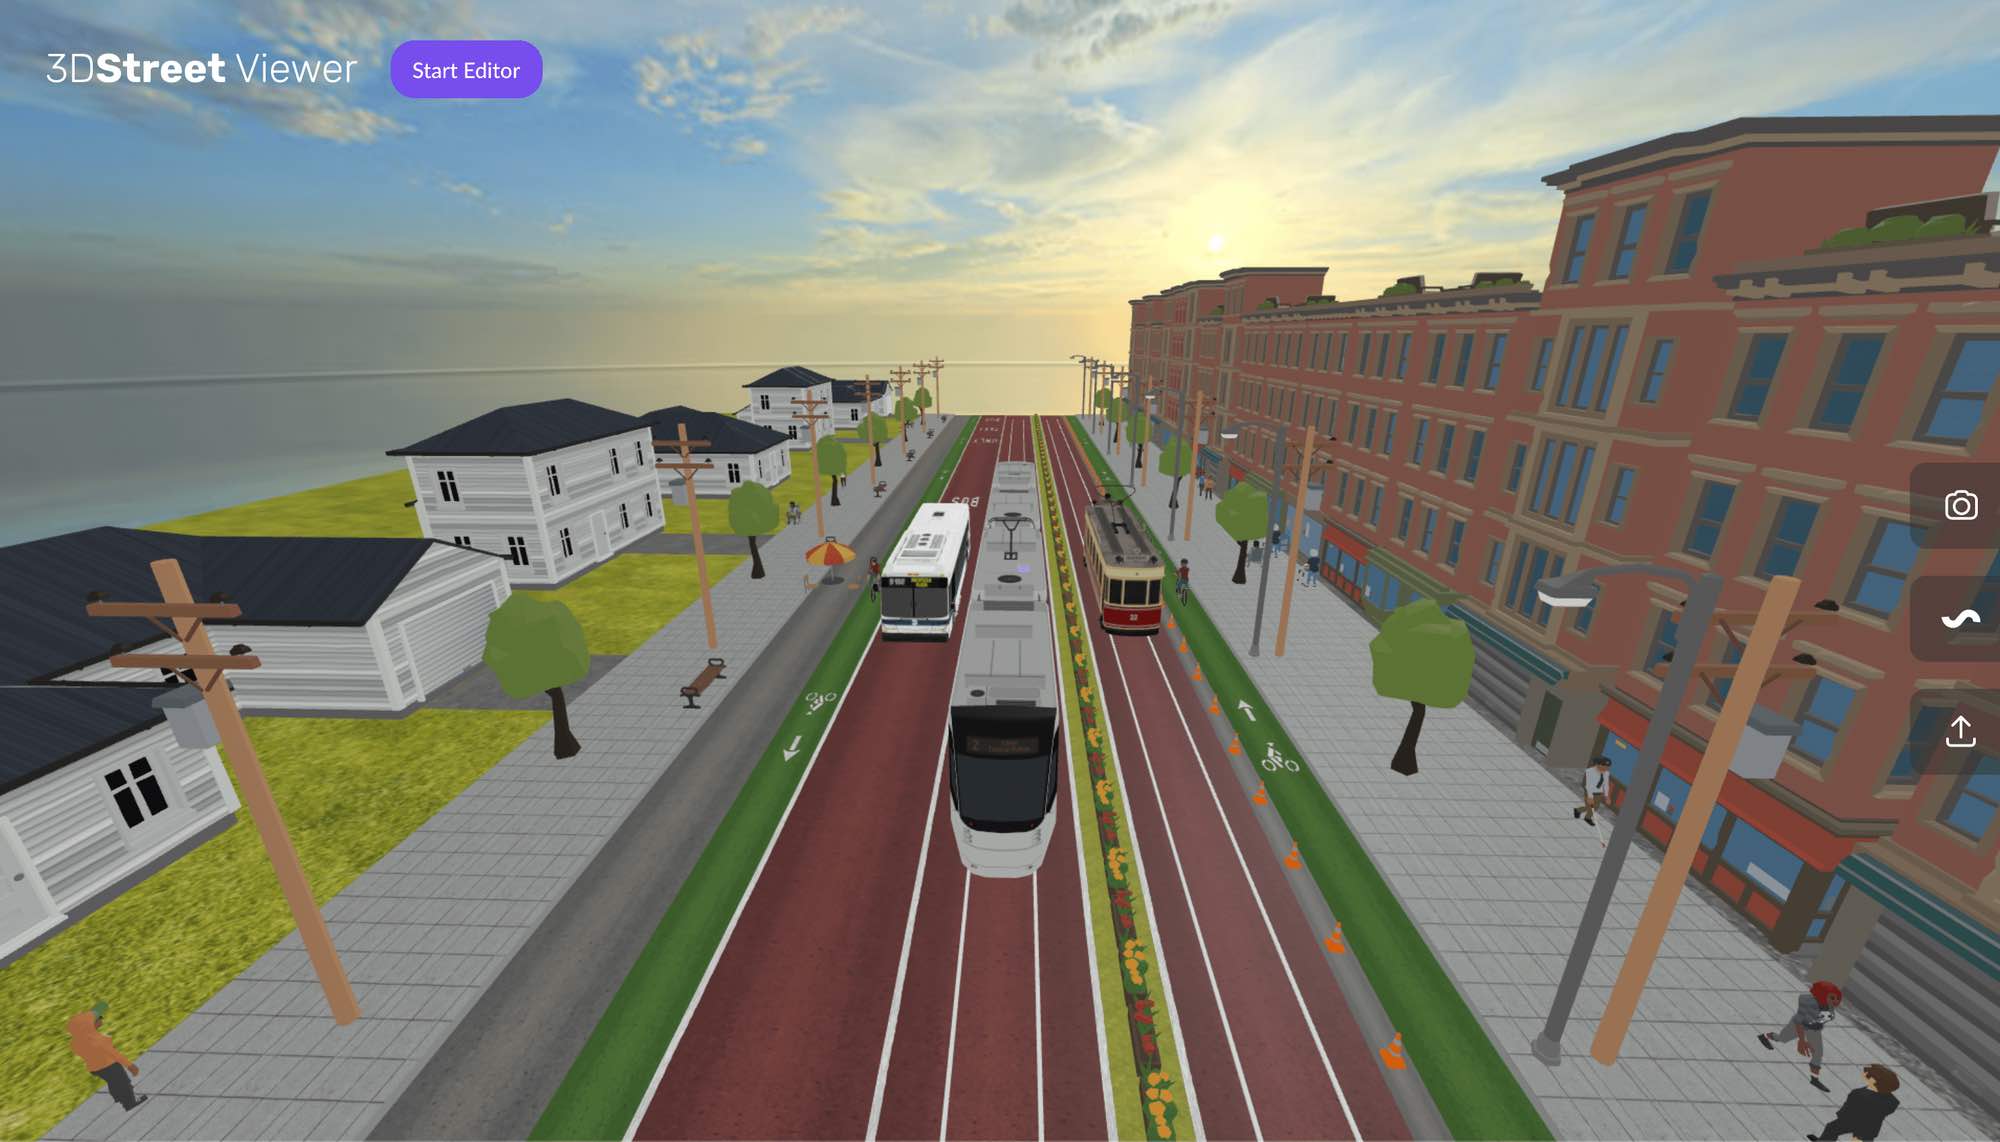 Screenshot of the 3DStreet Viewer application displaying a street scene with multi-modal transit vehicles, cycle tracks, and pedestrians on sidewalks in urban setting.